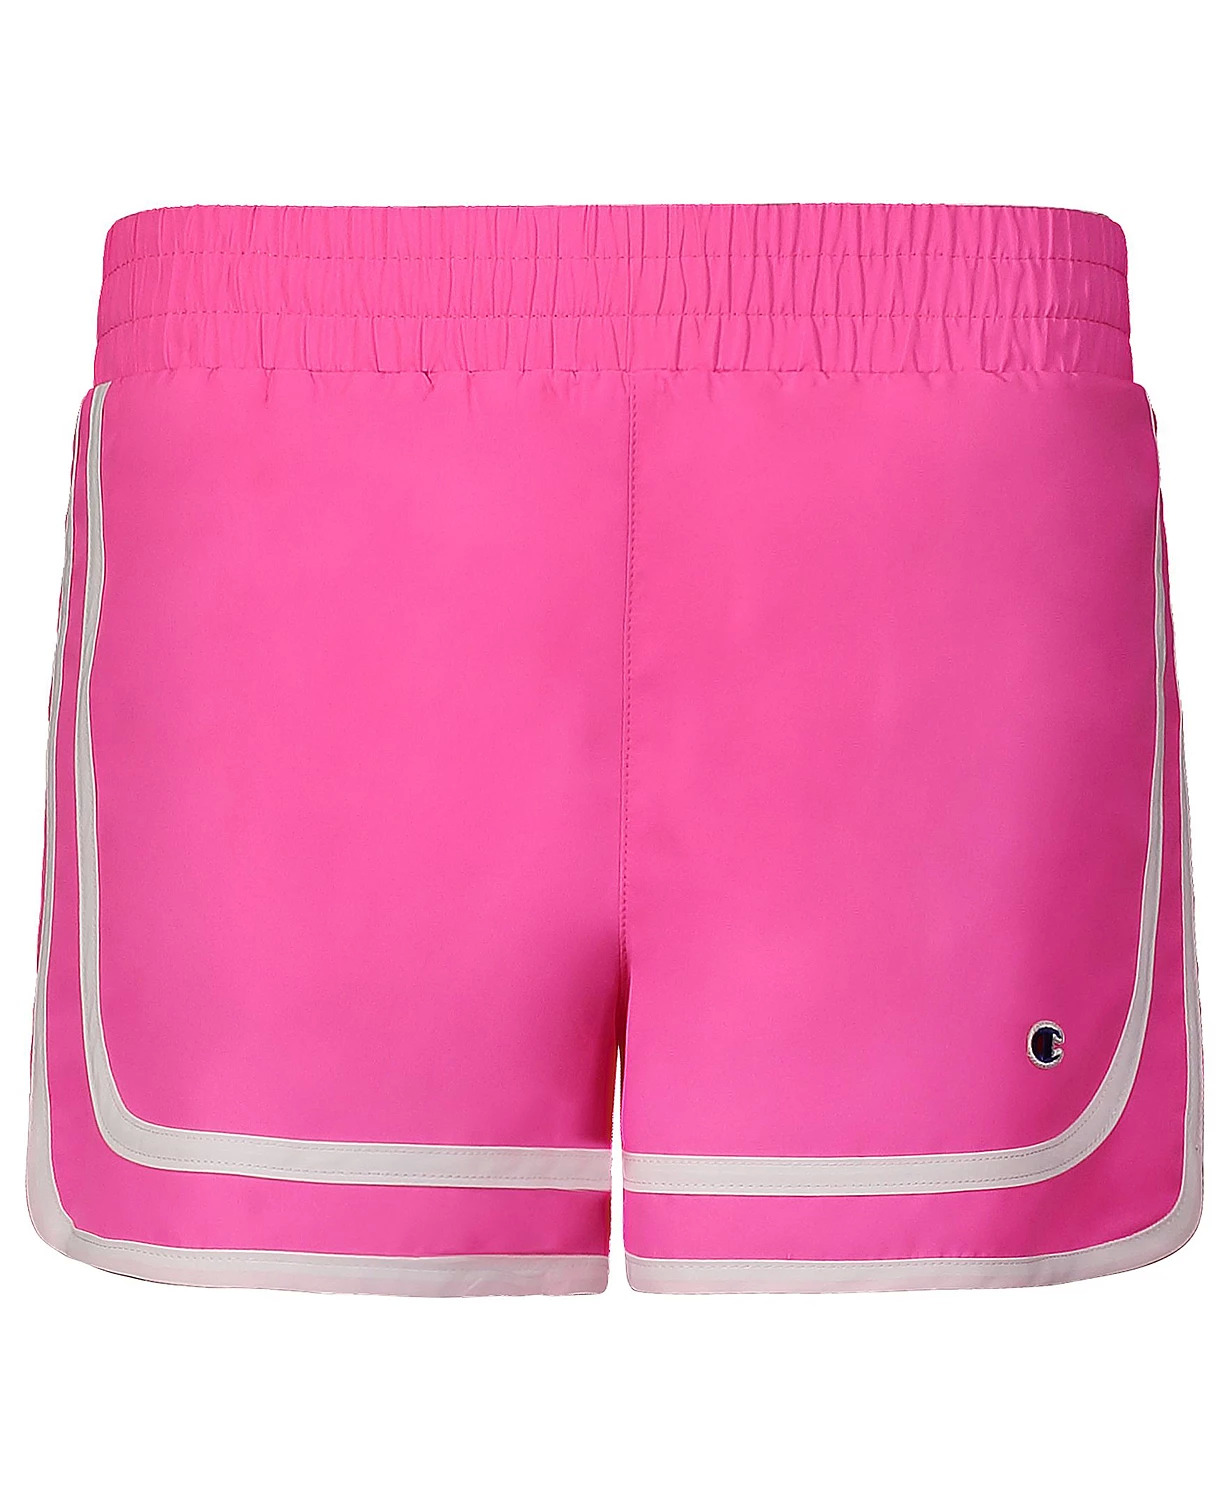 Champion Big Girls' Solid Varsity Shorts (various) From $4.96 & More + or less w/ SD Cashback + Free Store Pickup at Macy's or FS on $25+